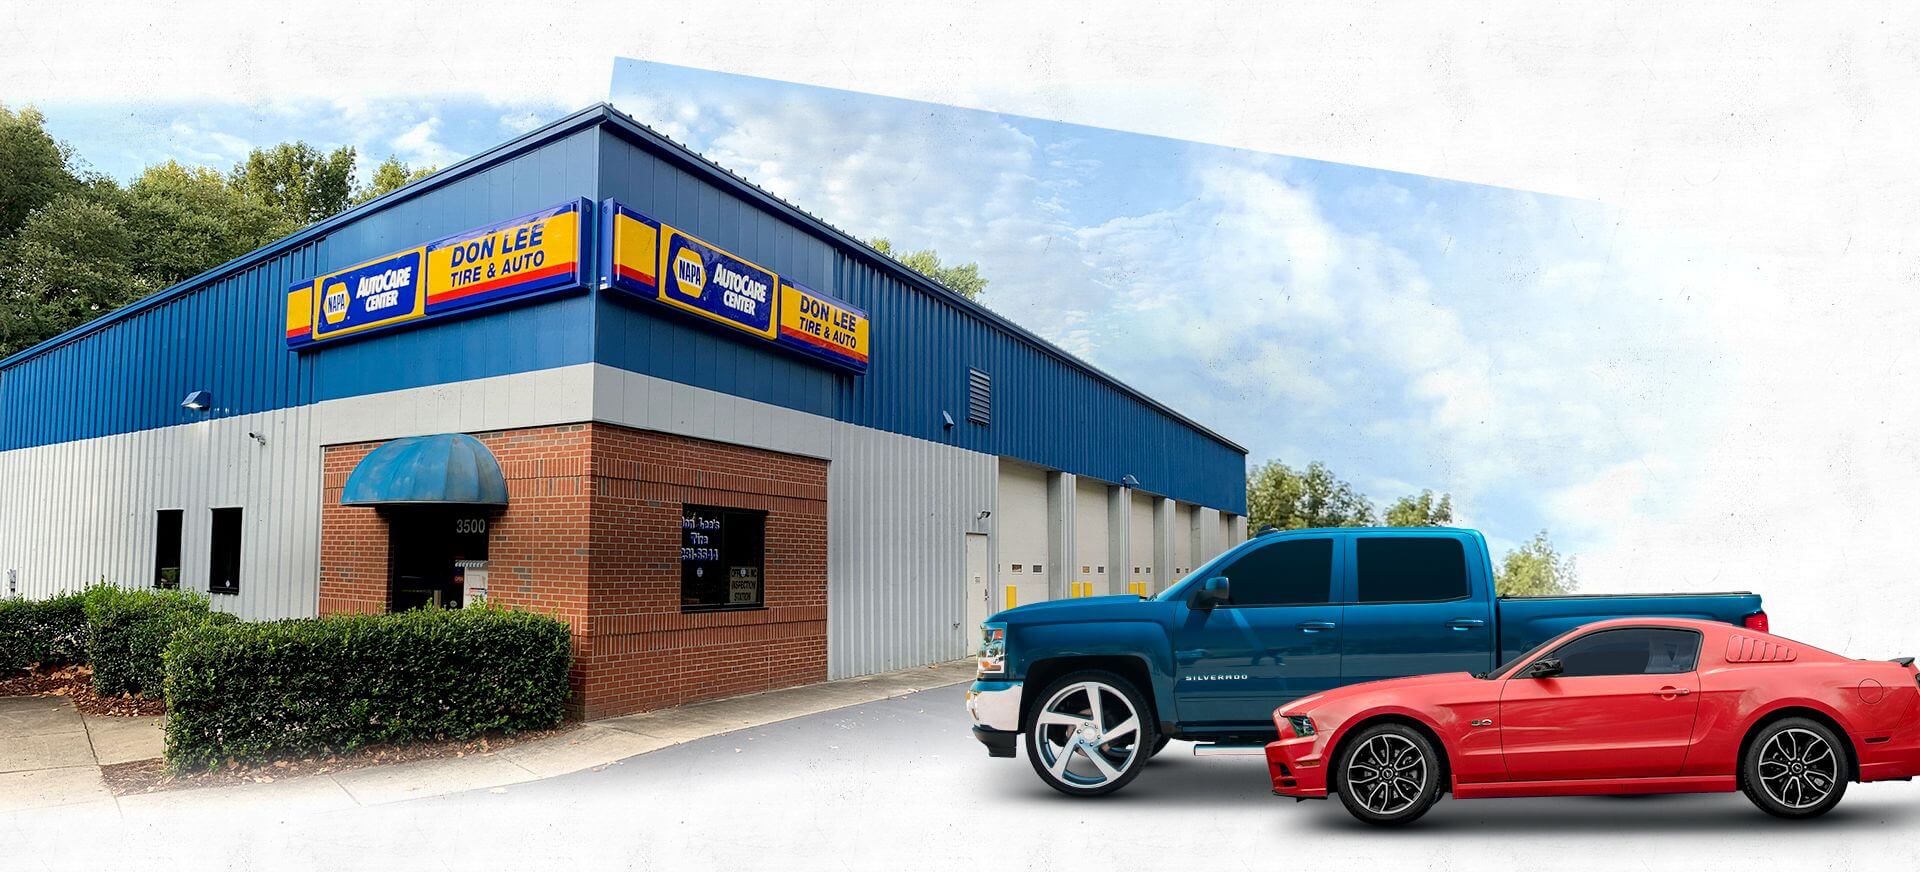 Raleigh Auto Repair - Don Lee's Tire & Auto